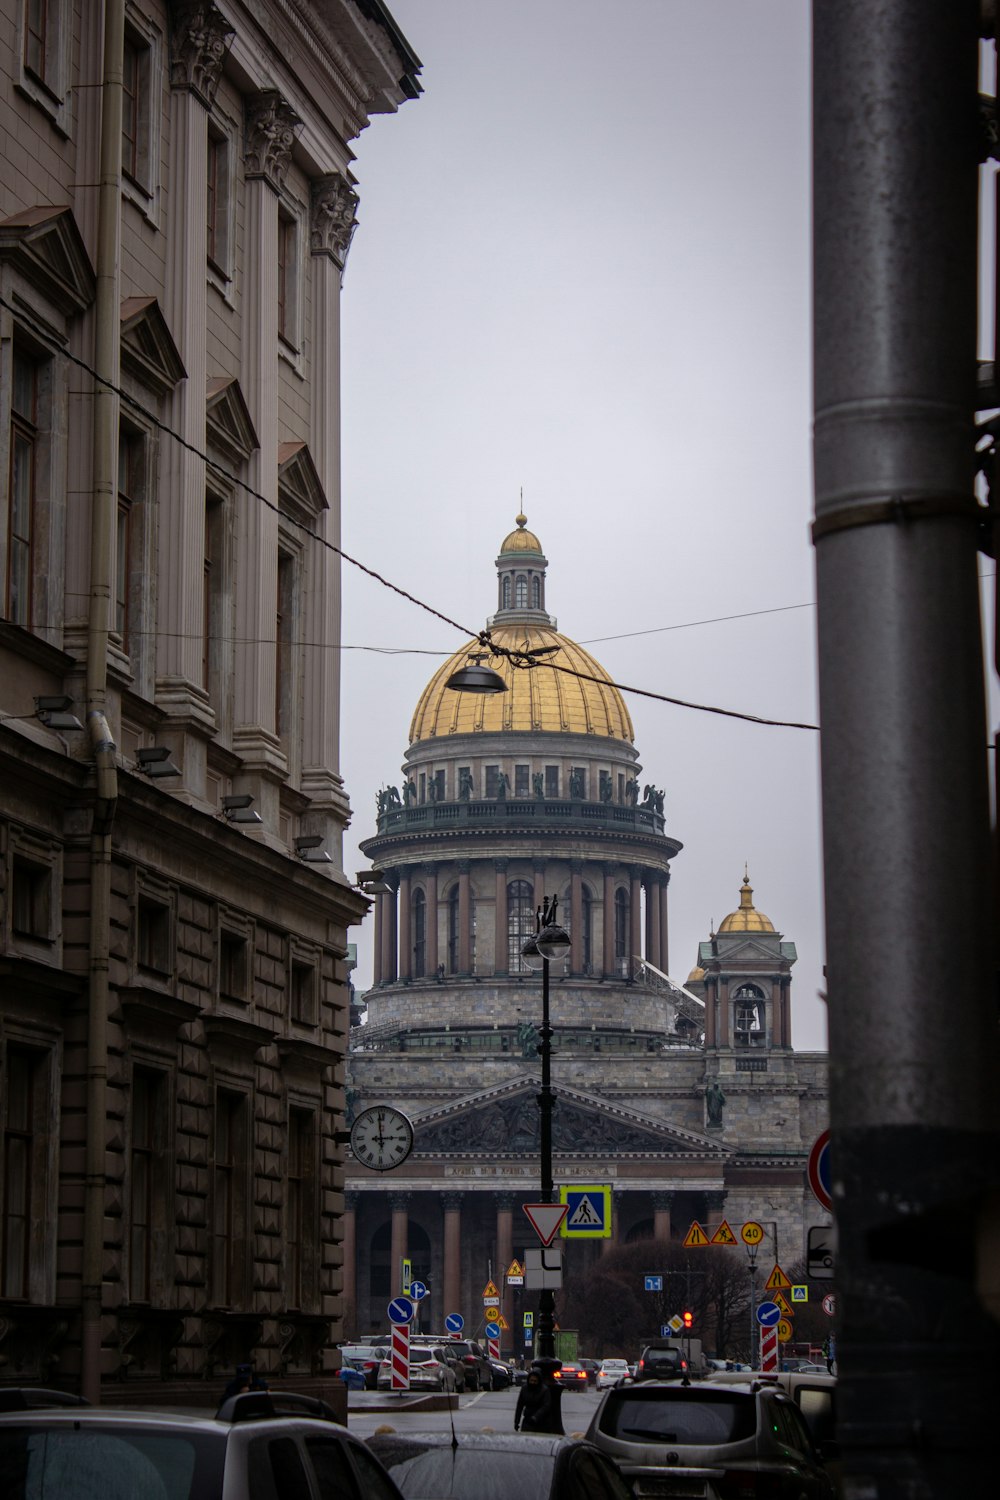 white and gold dome building